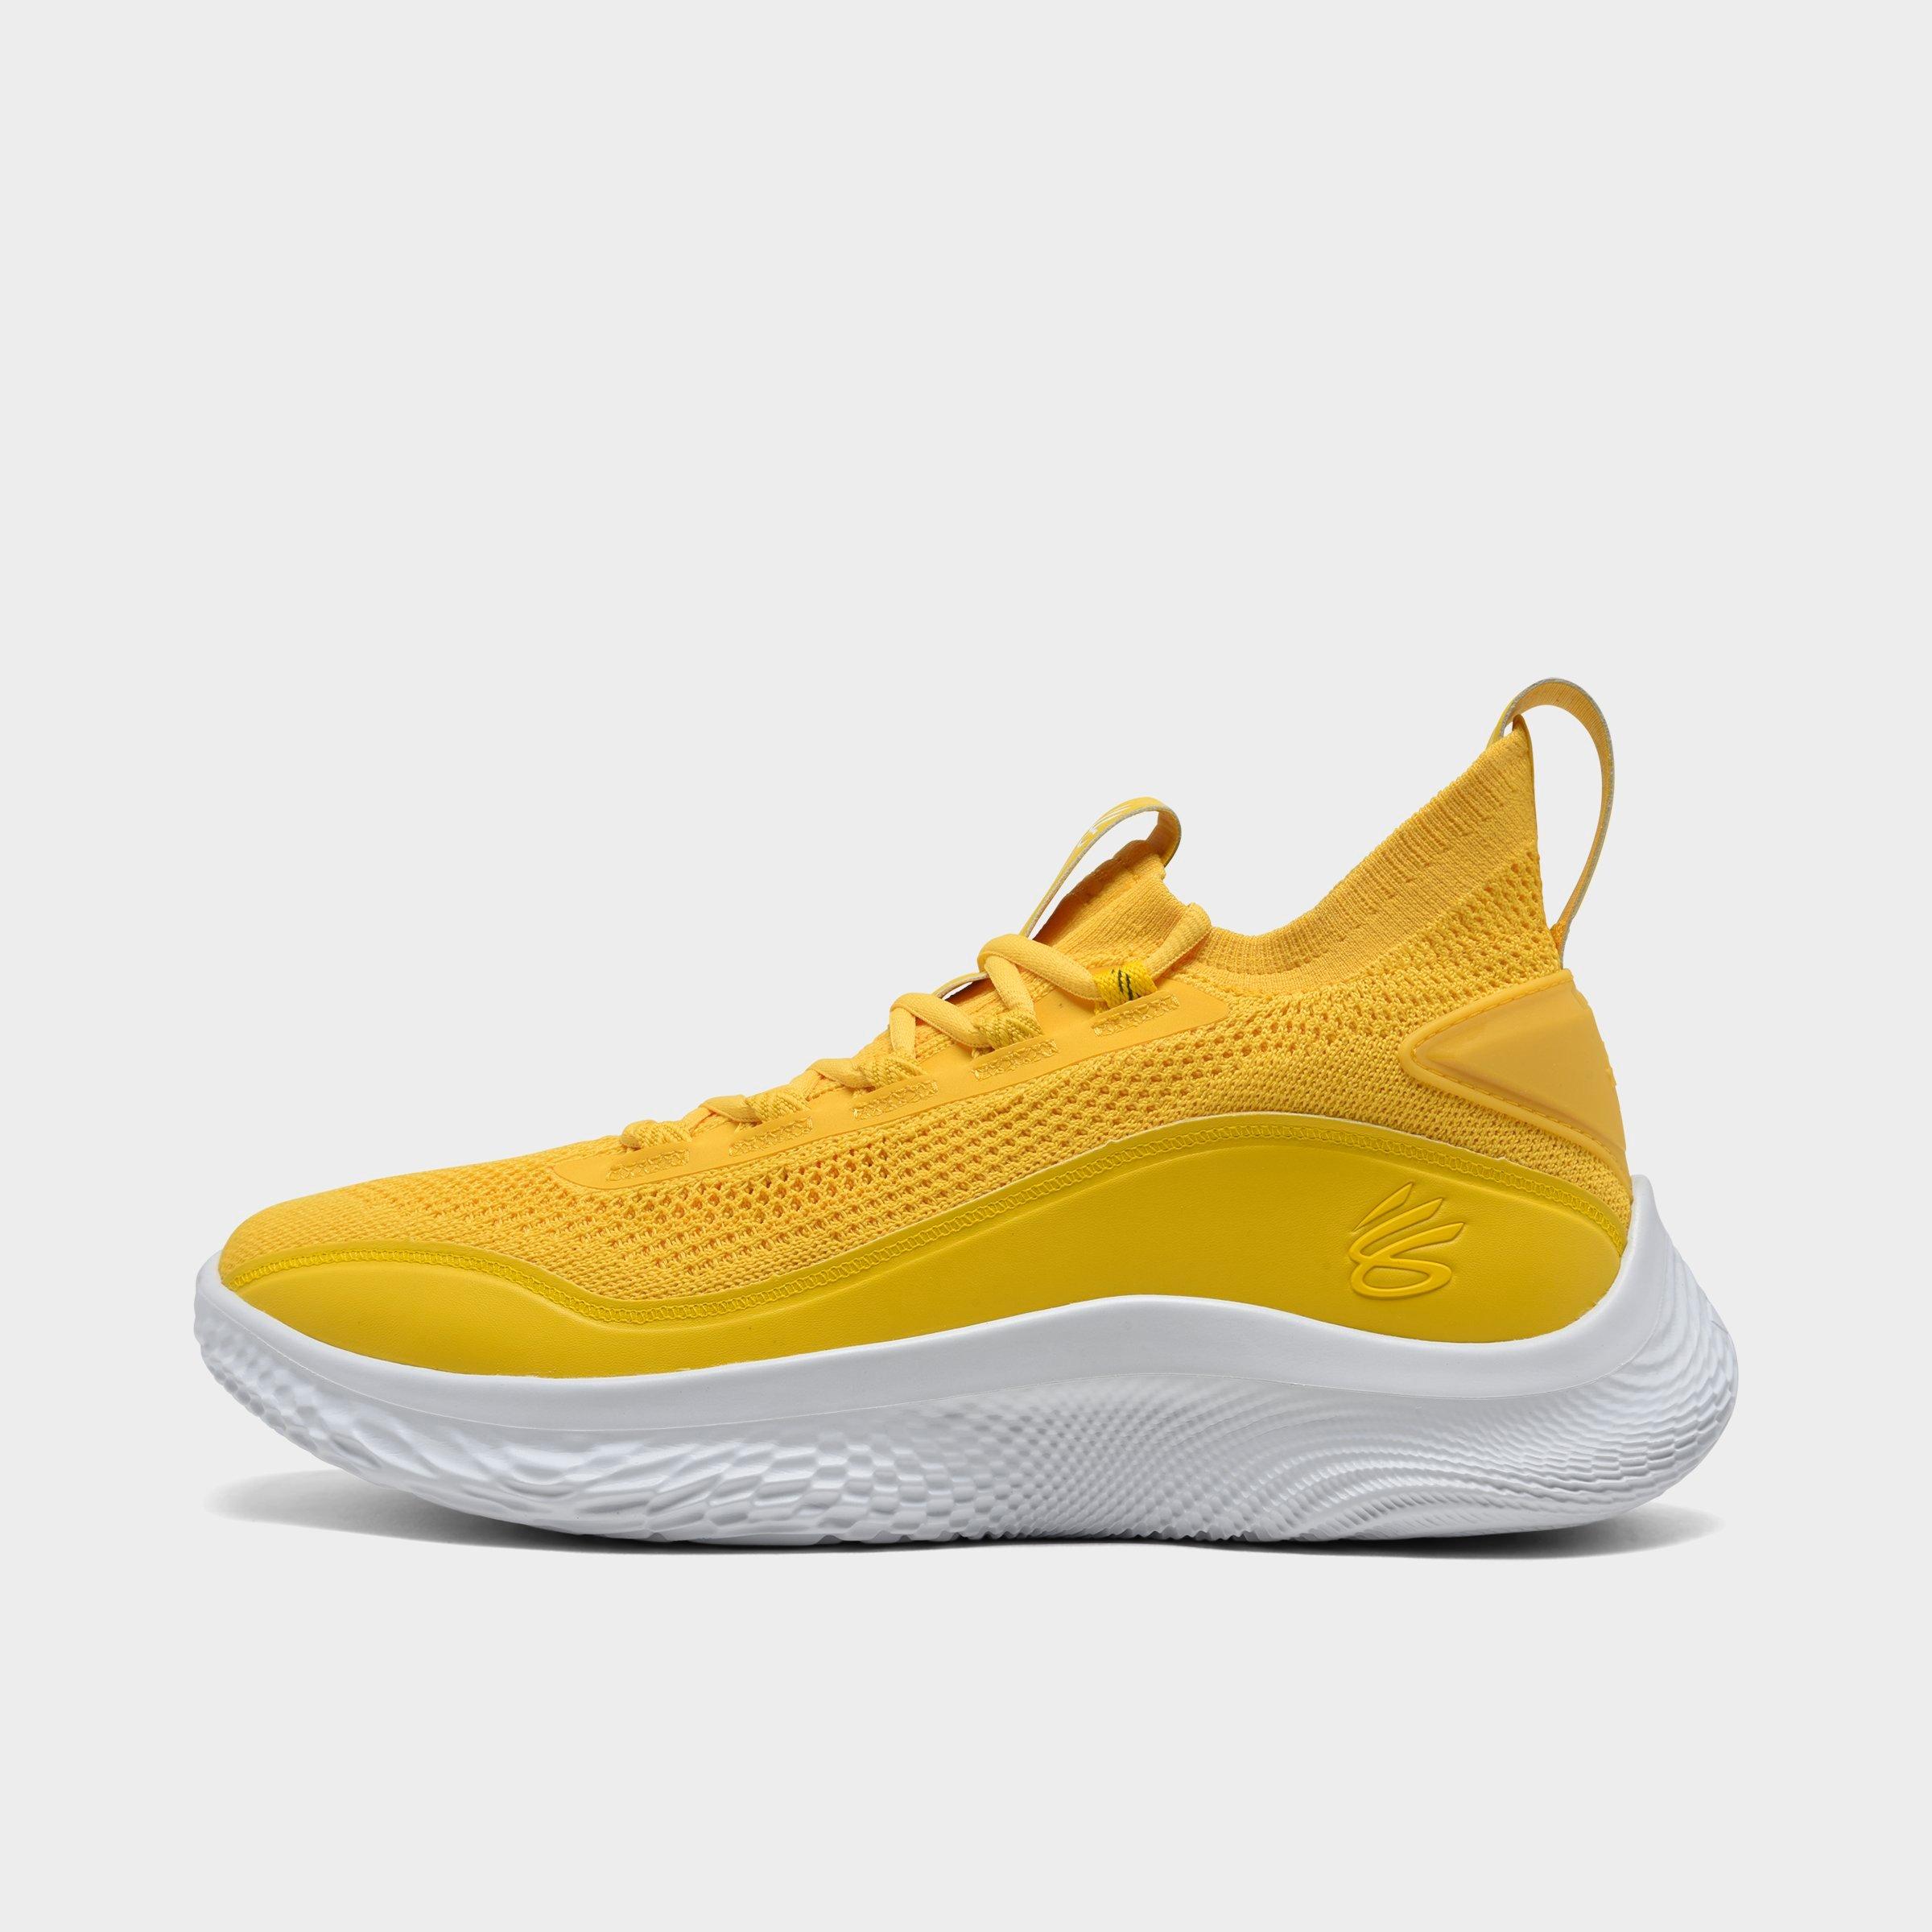 under armour curry yellow